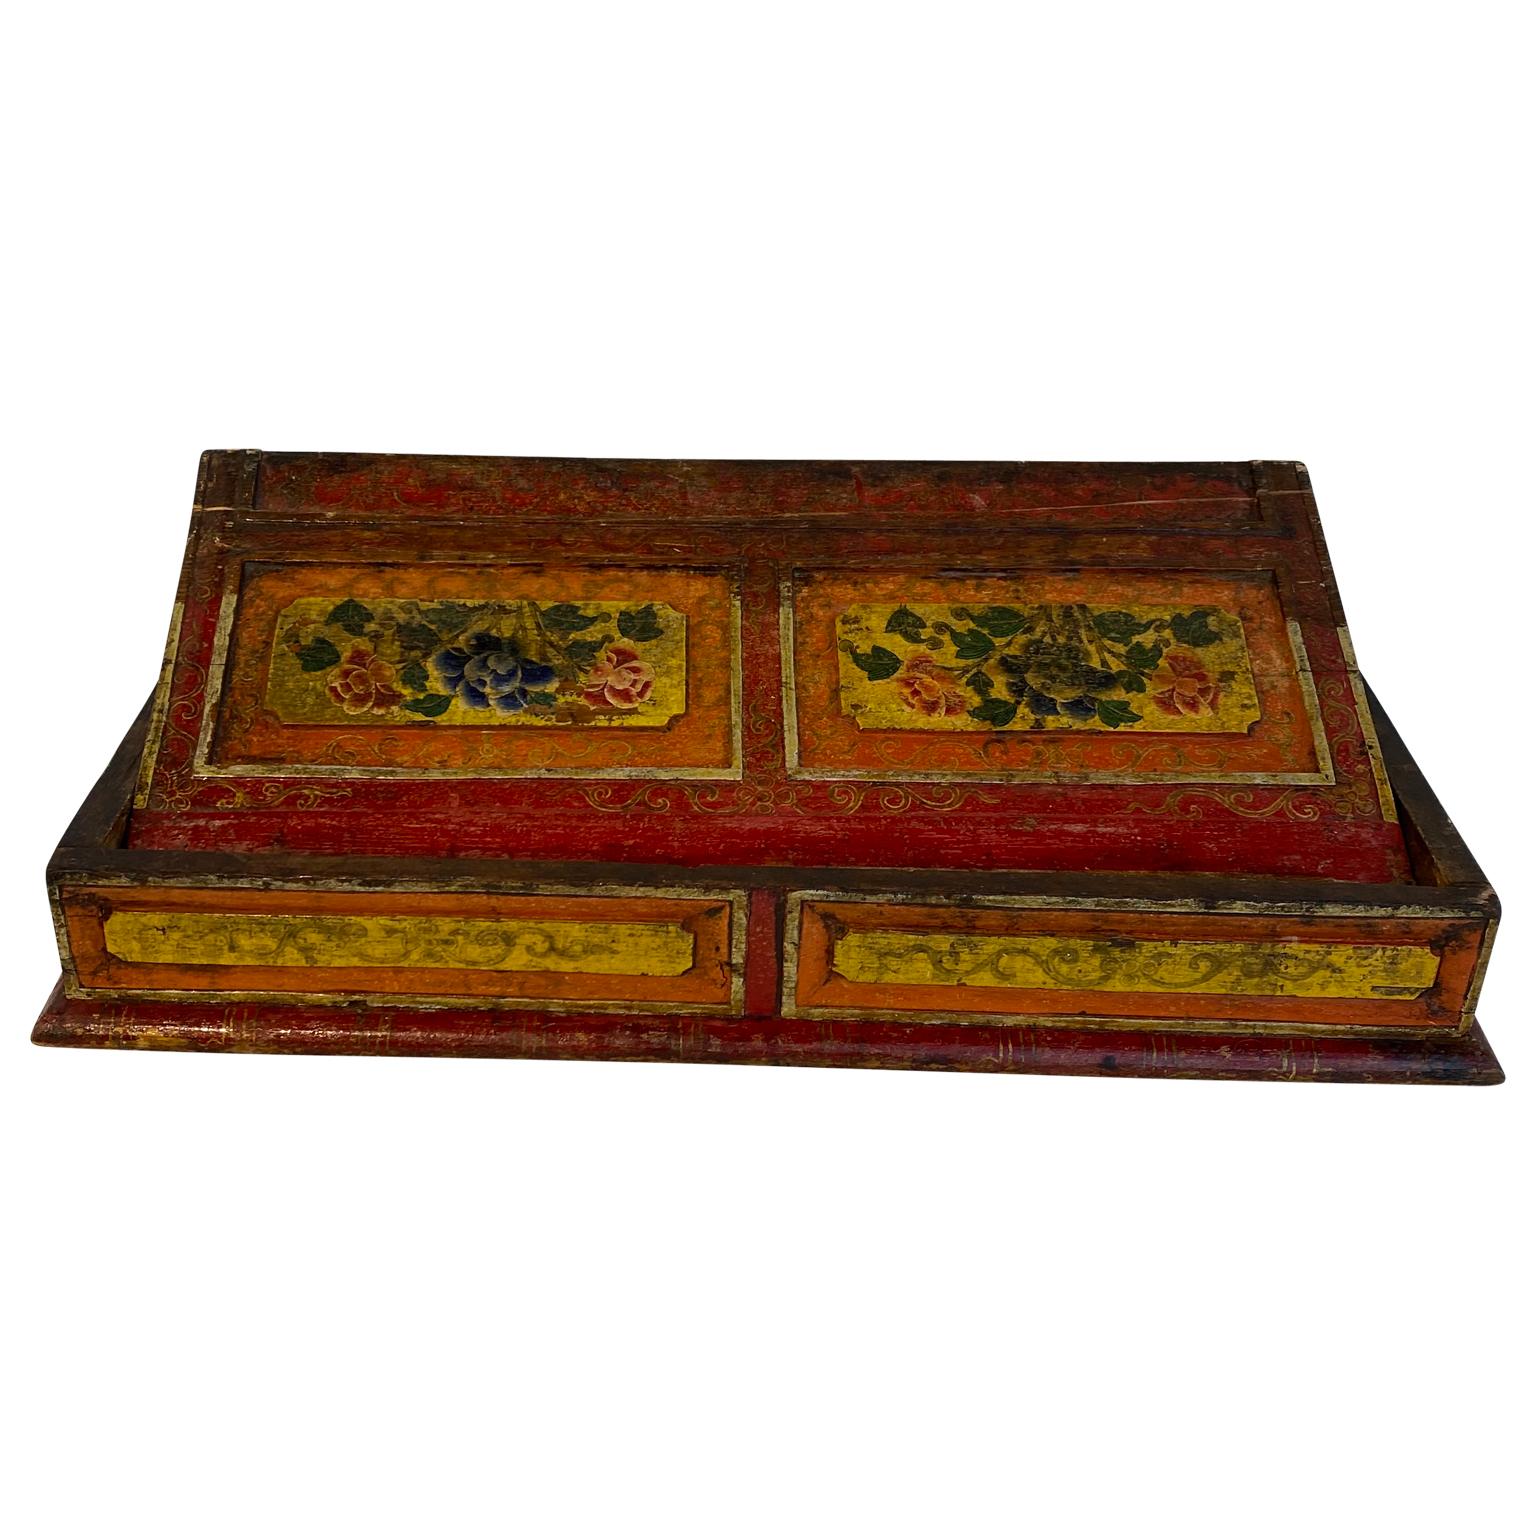 Small Asian red and yellow painted folk art desk-top writing desk

The desk top is collapsable, please see detailed images listed.